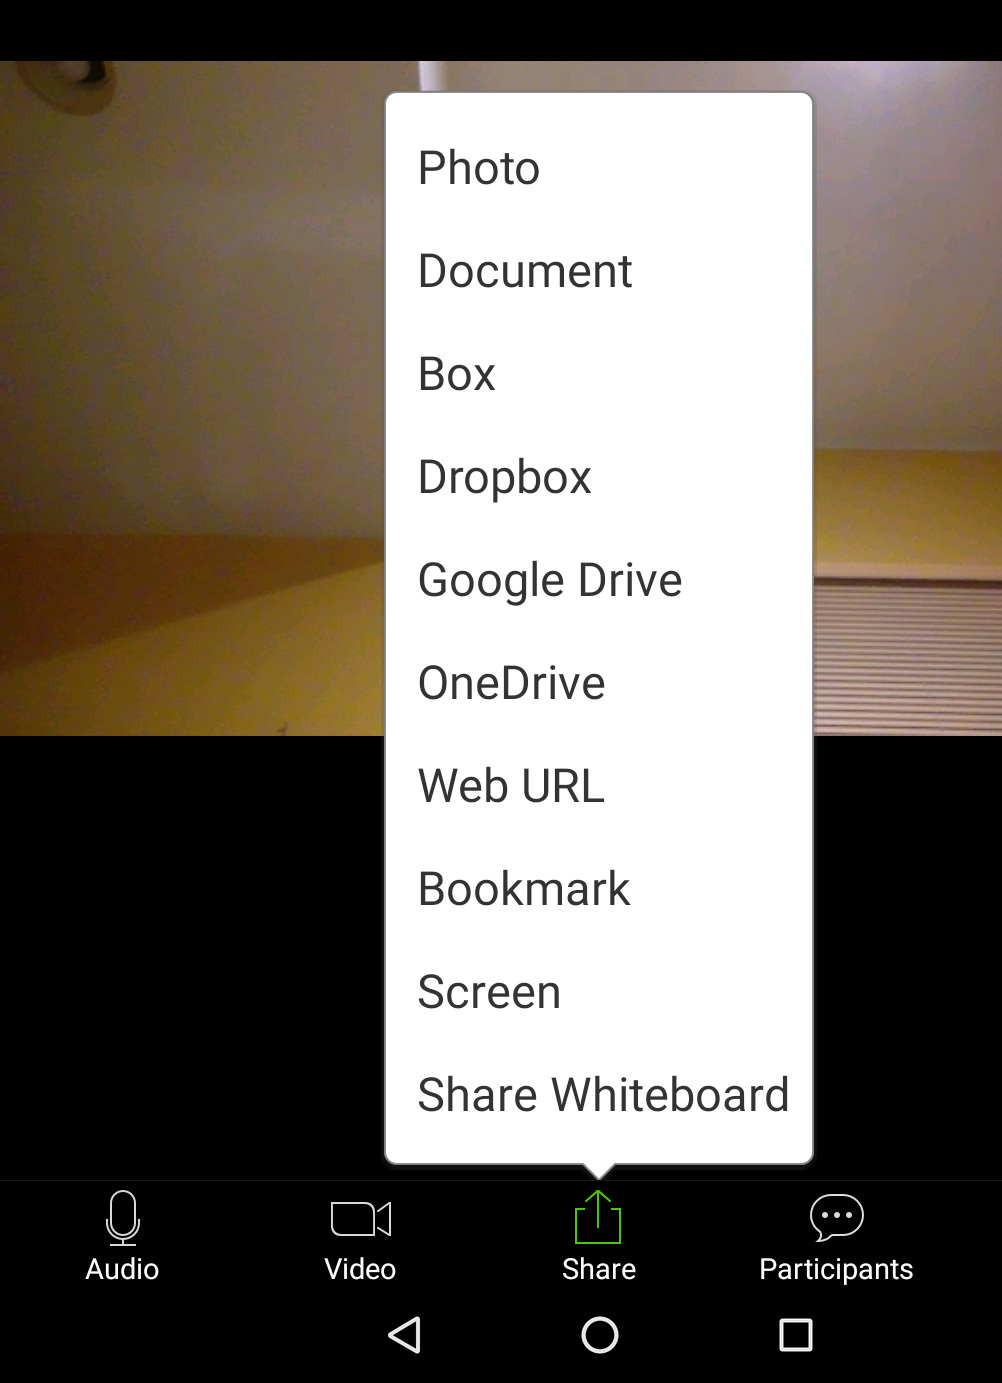 List of content that can be shared on Android tablet